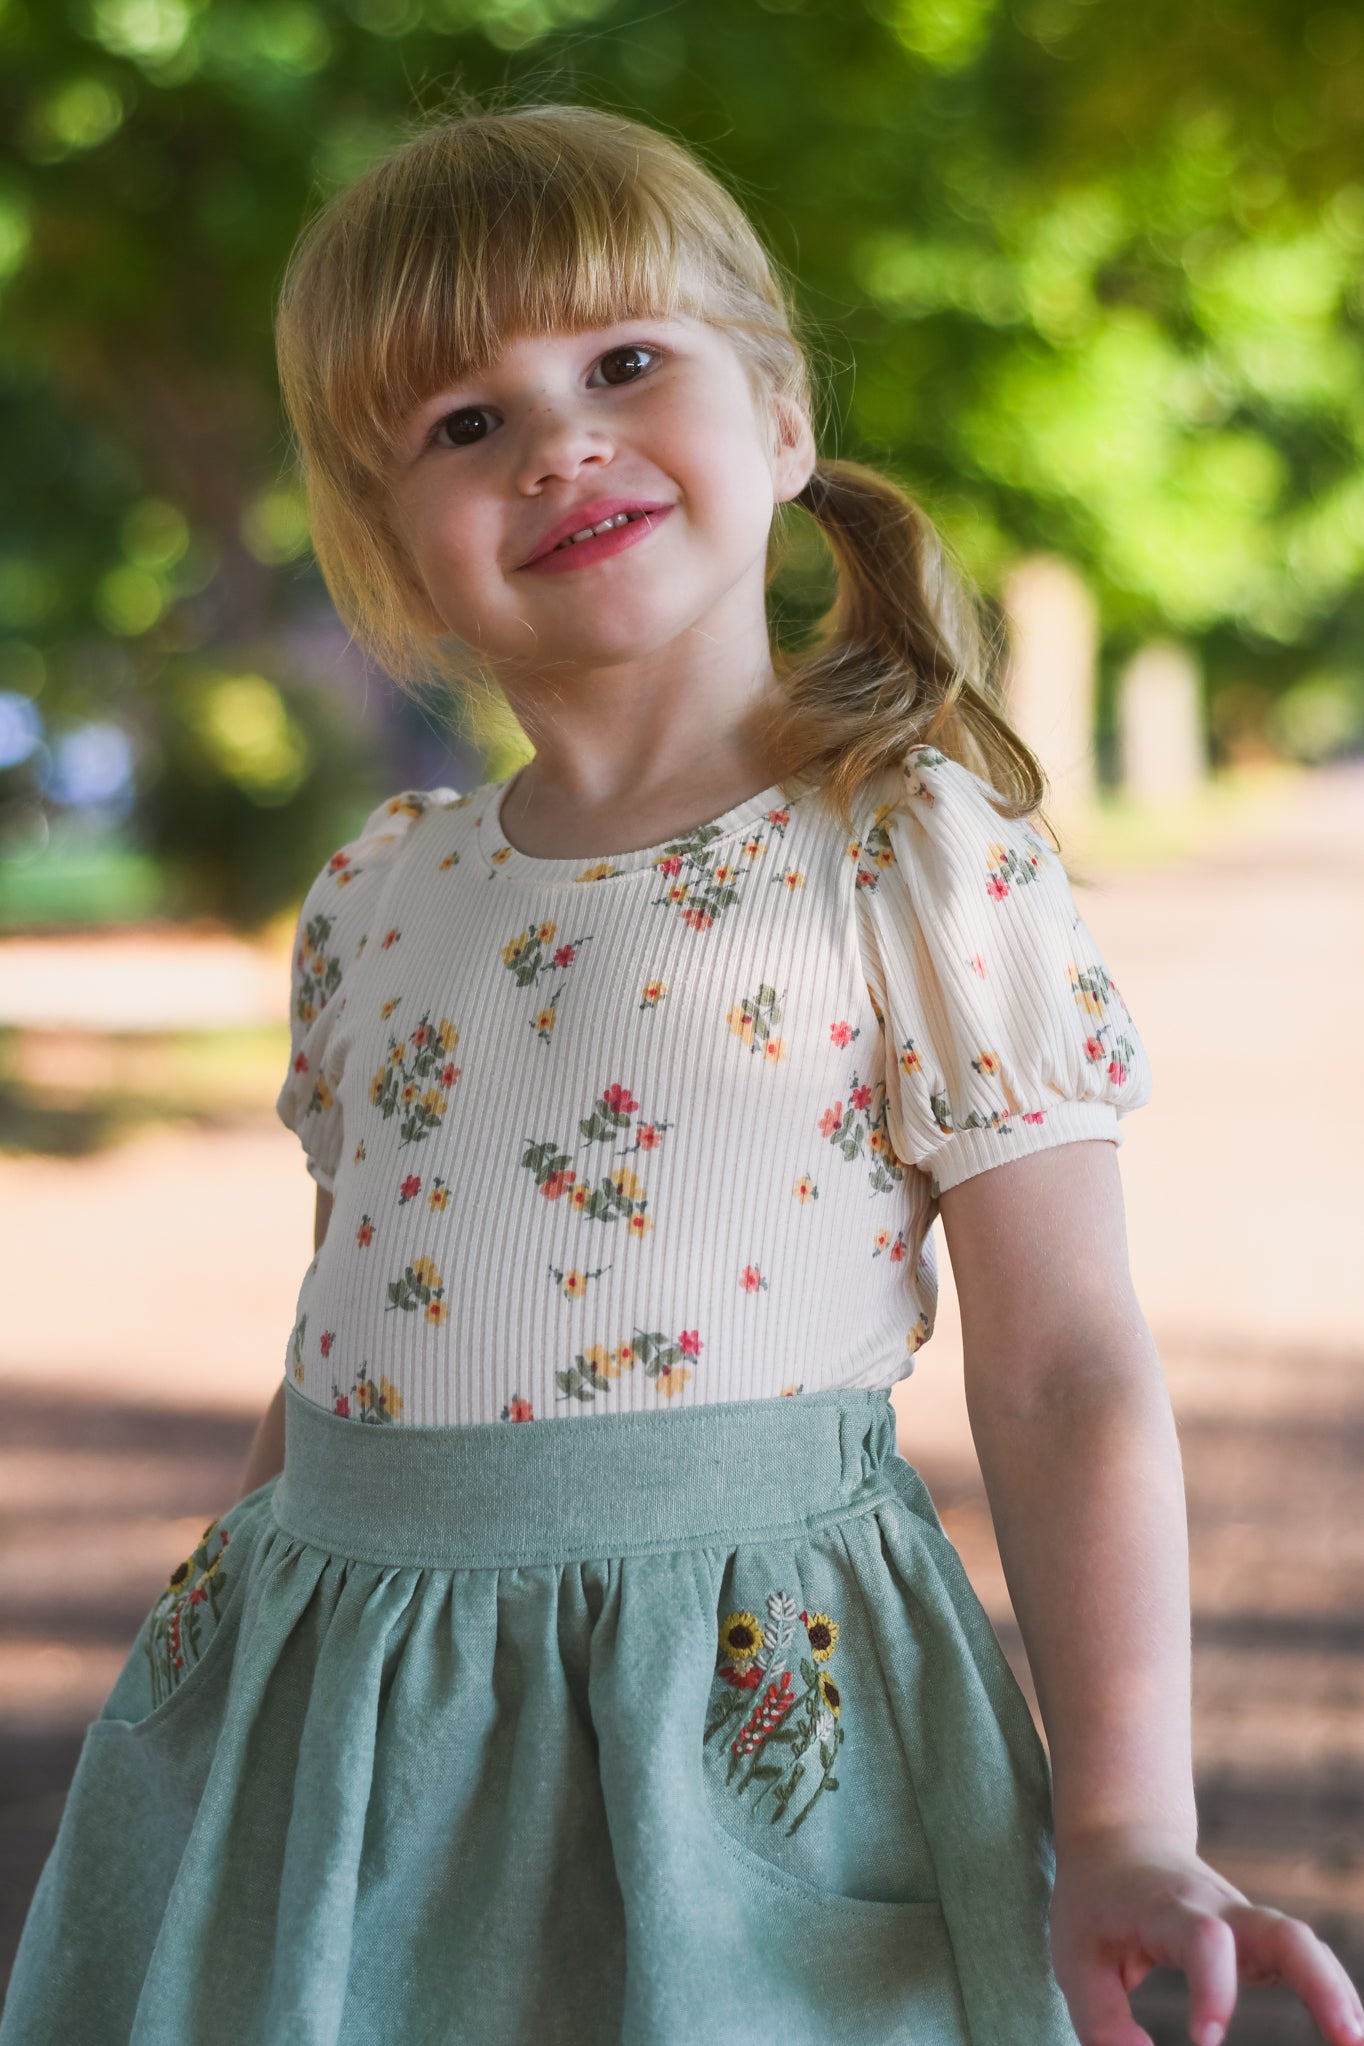 Apple Berry Skirt with Embroidered Daisy Pockets! – Peony Patterns